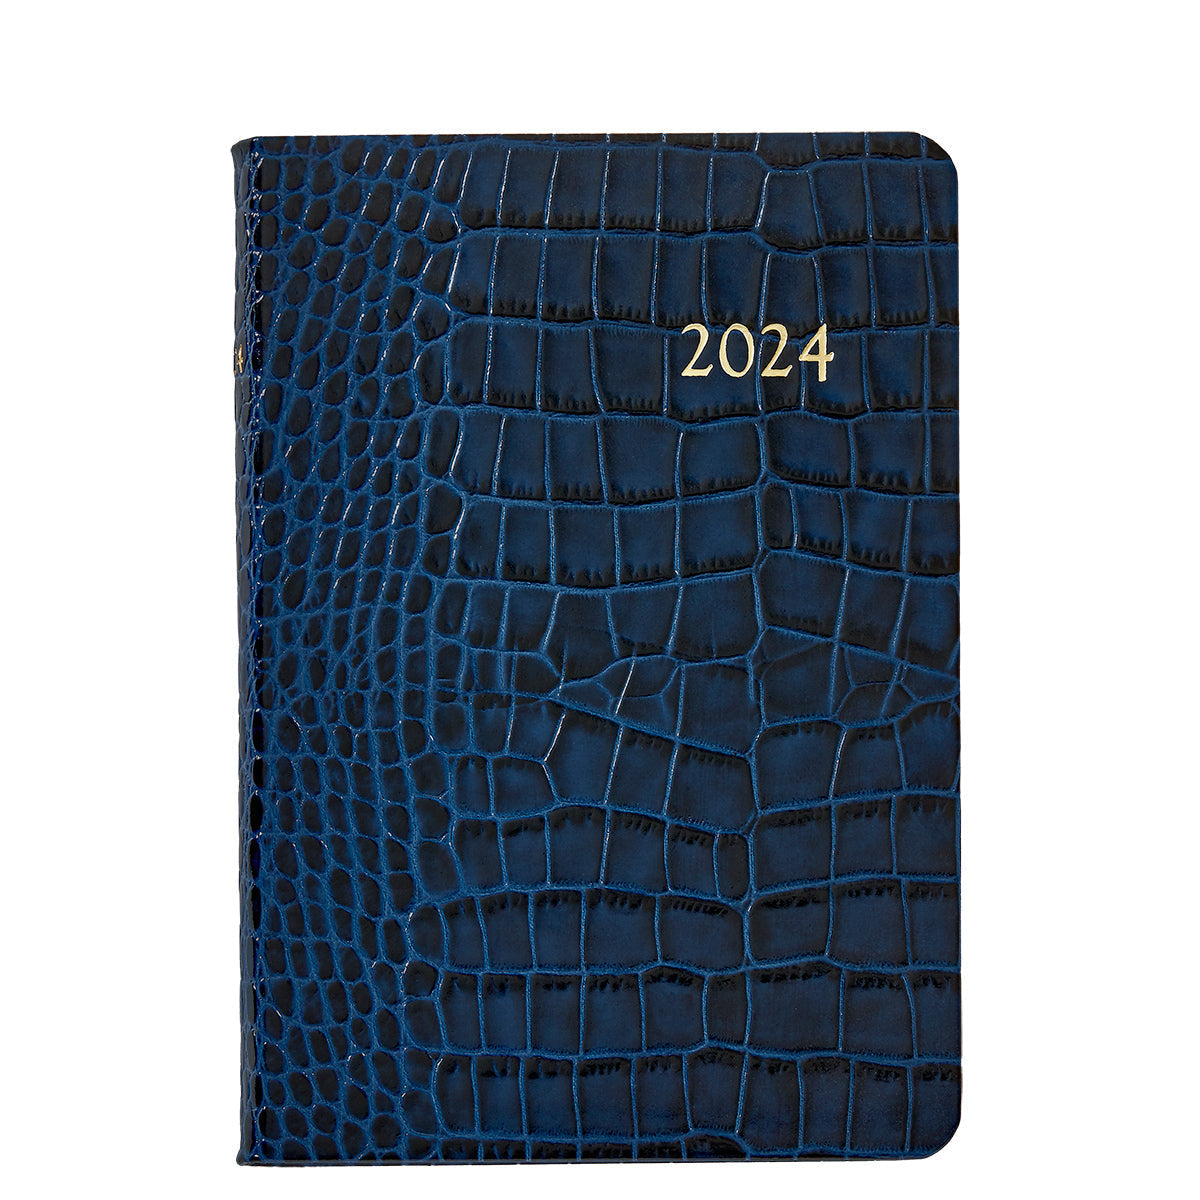 2024 Daily Journal in Embossed Crocodile Leather